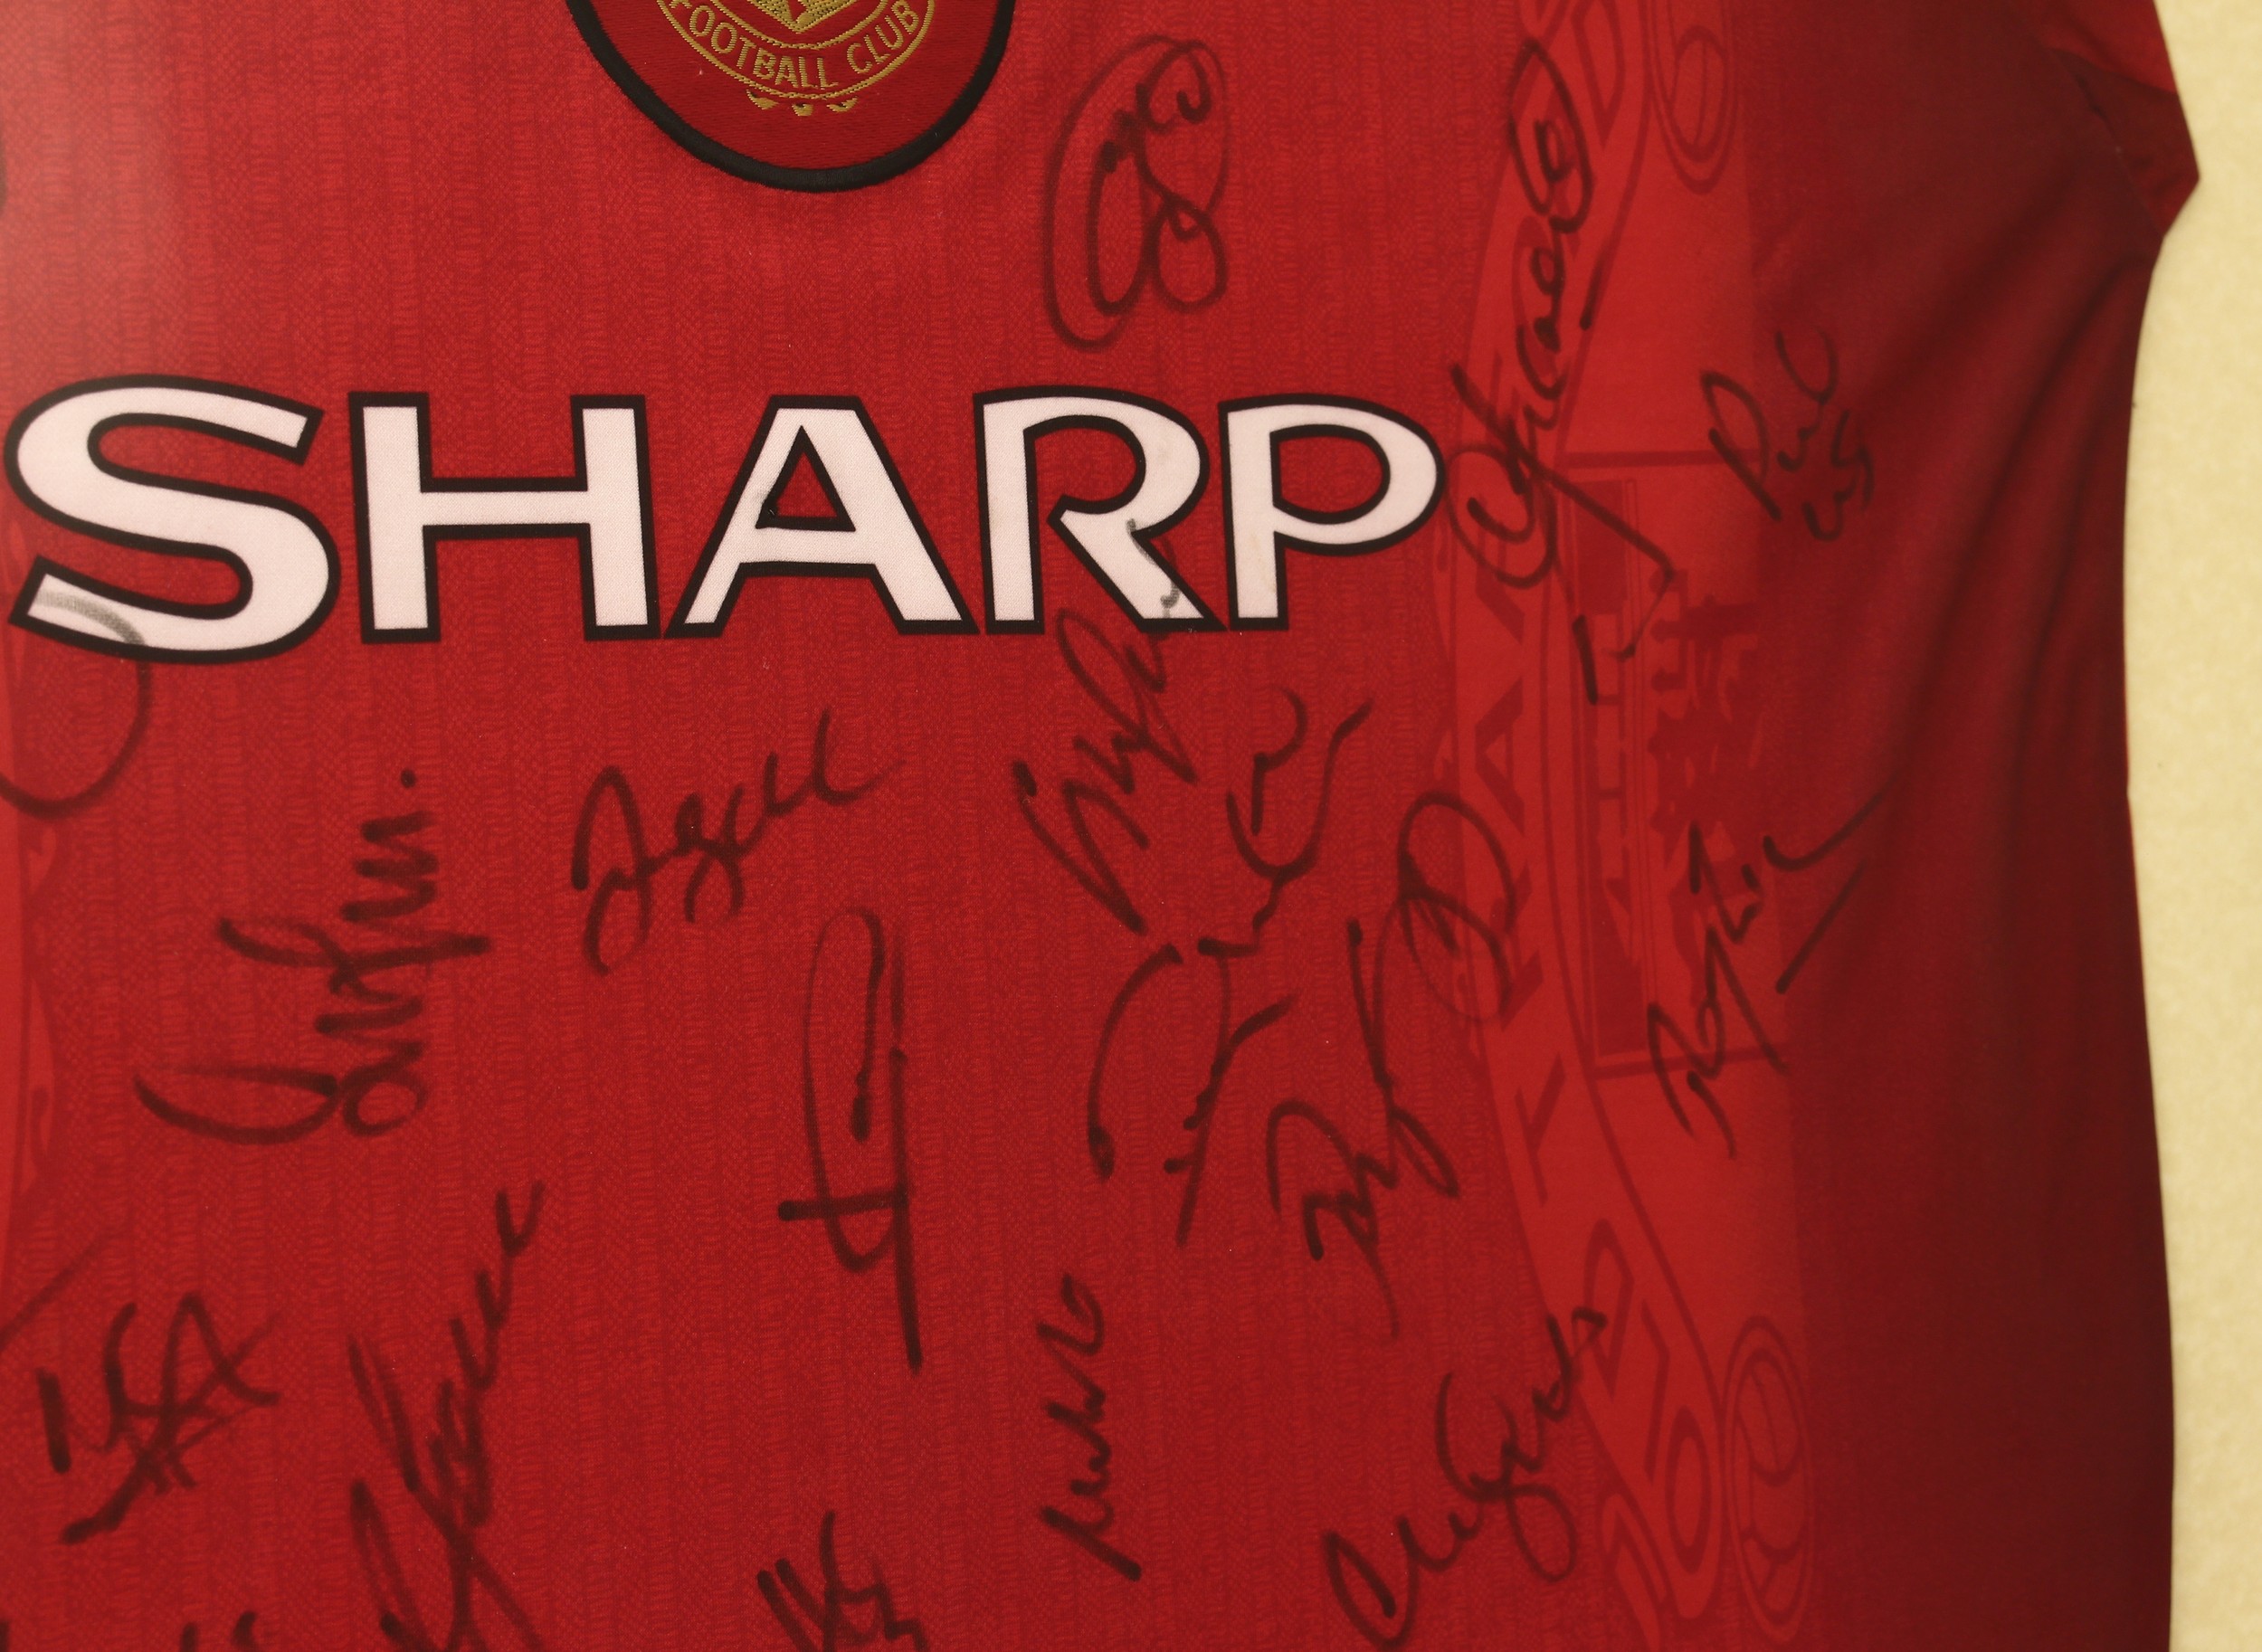 Sport, Football, Autographs, Manchester United F.C. (The Red Devils) - a 1996-1998 'Theatre of - Image 5 of 9